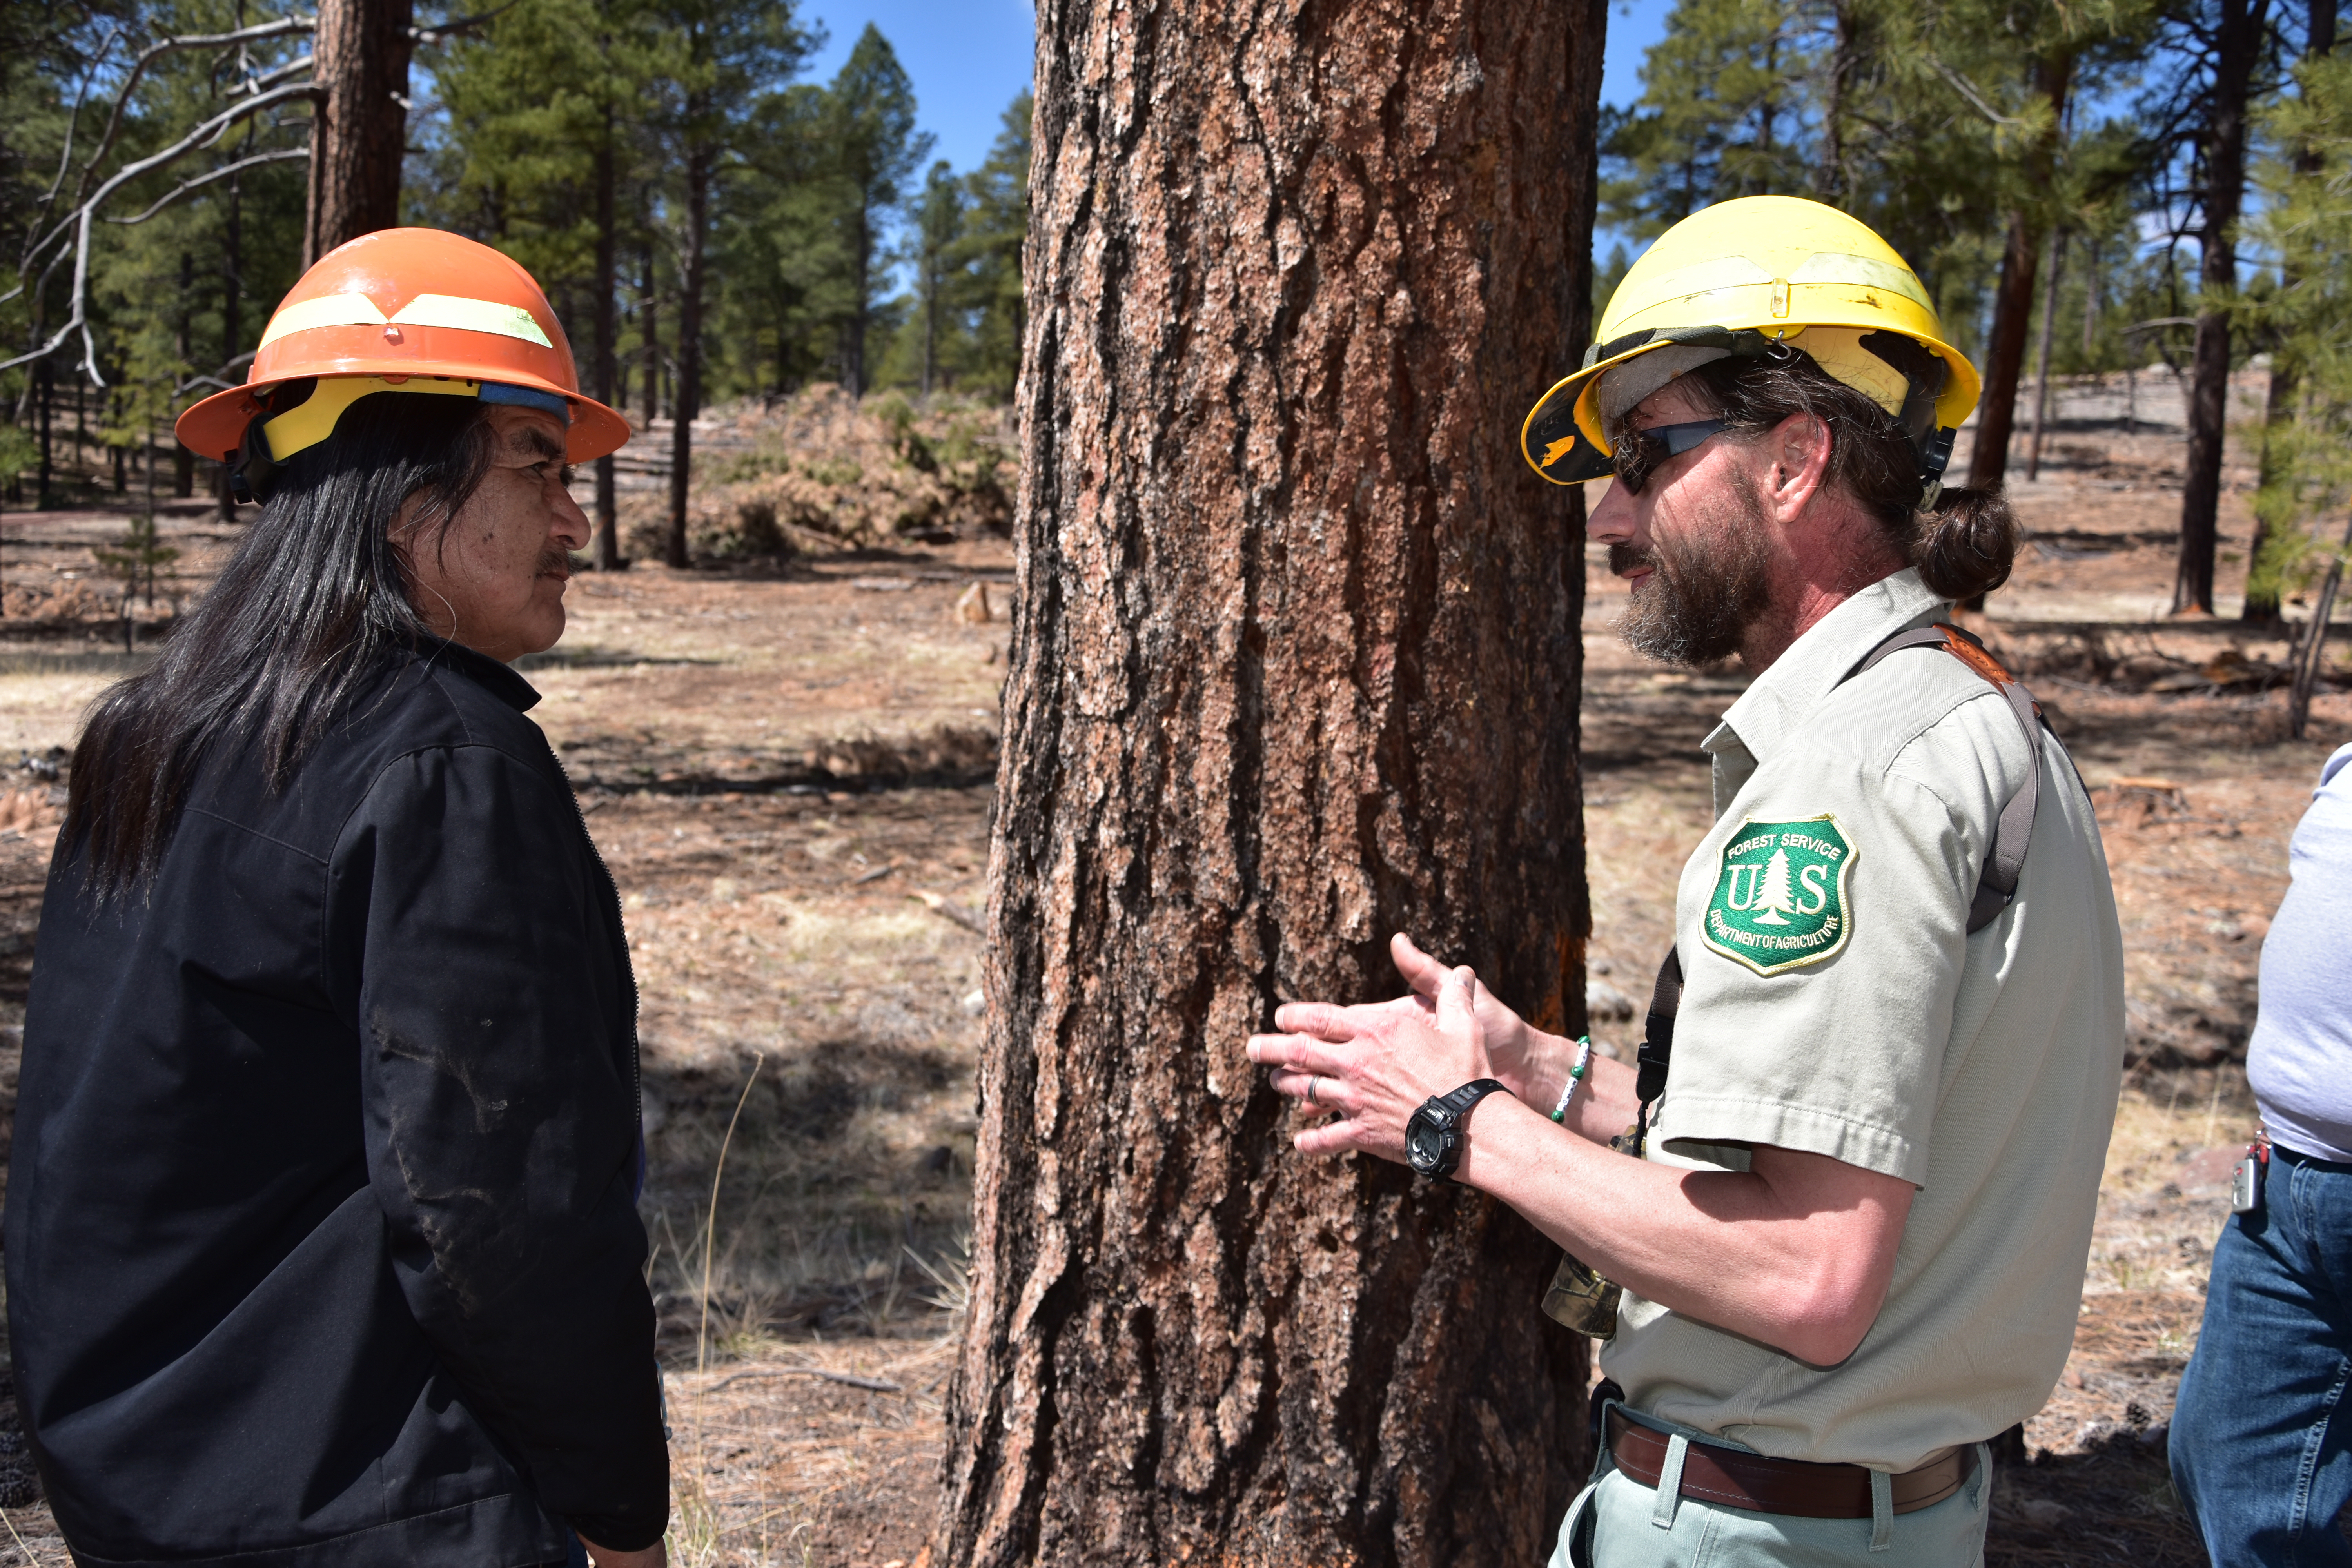 Tribal Relations  US Forest Service